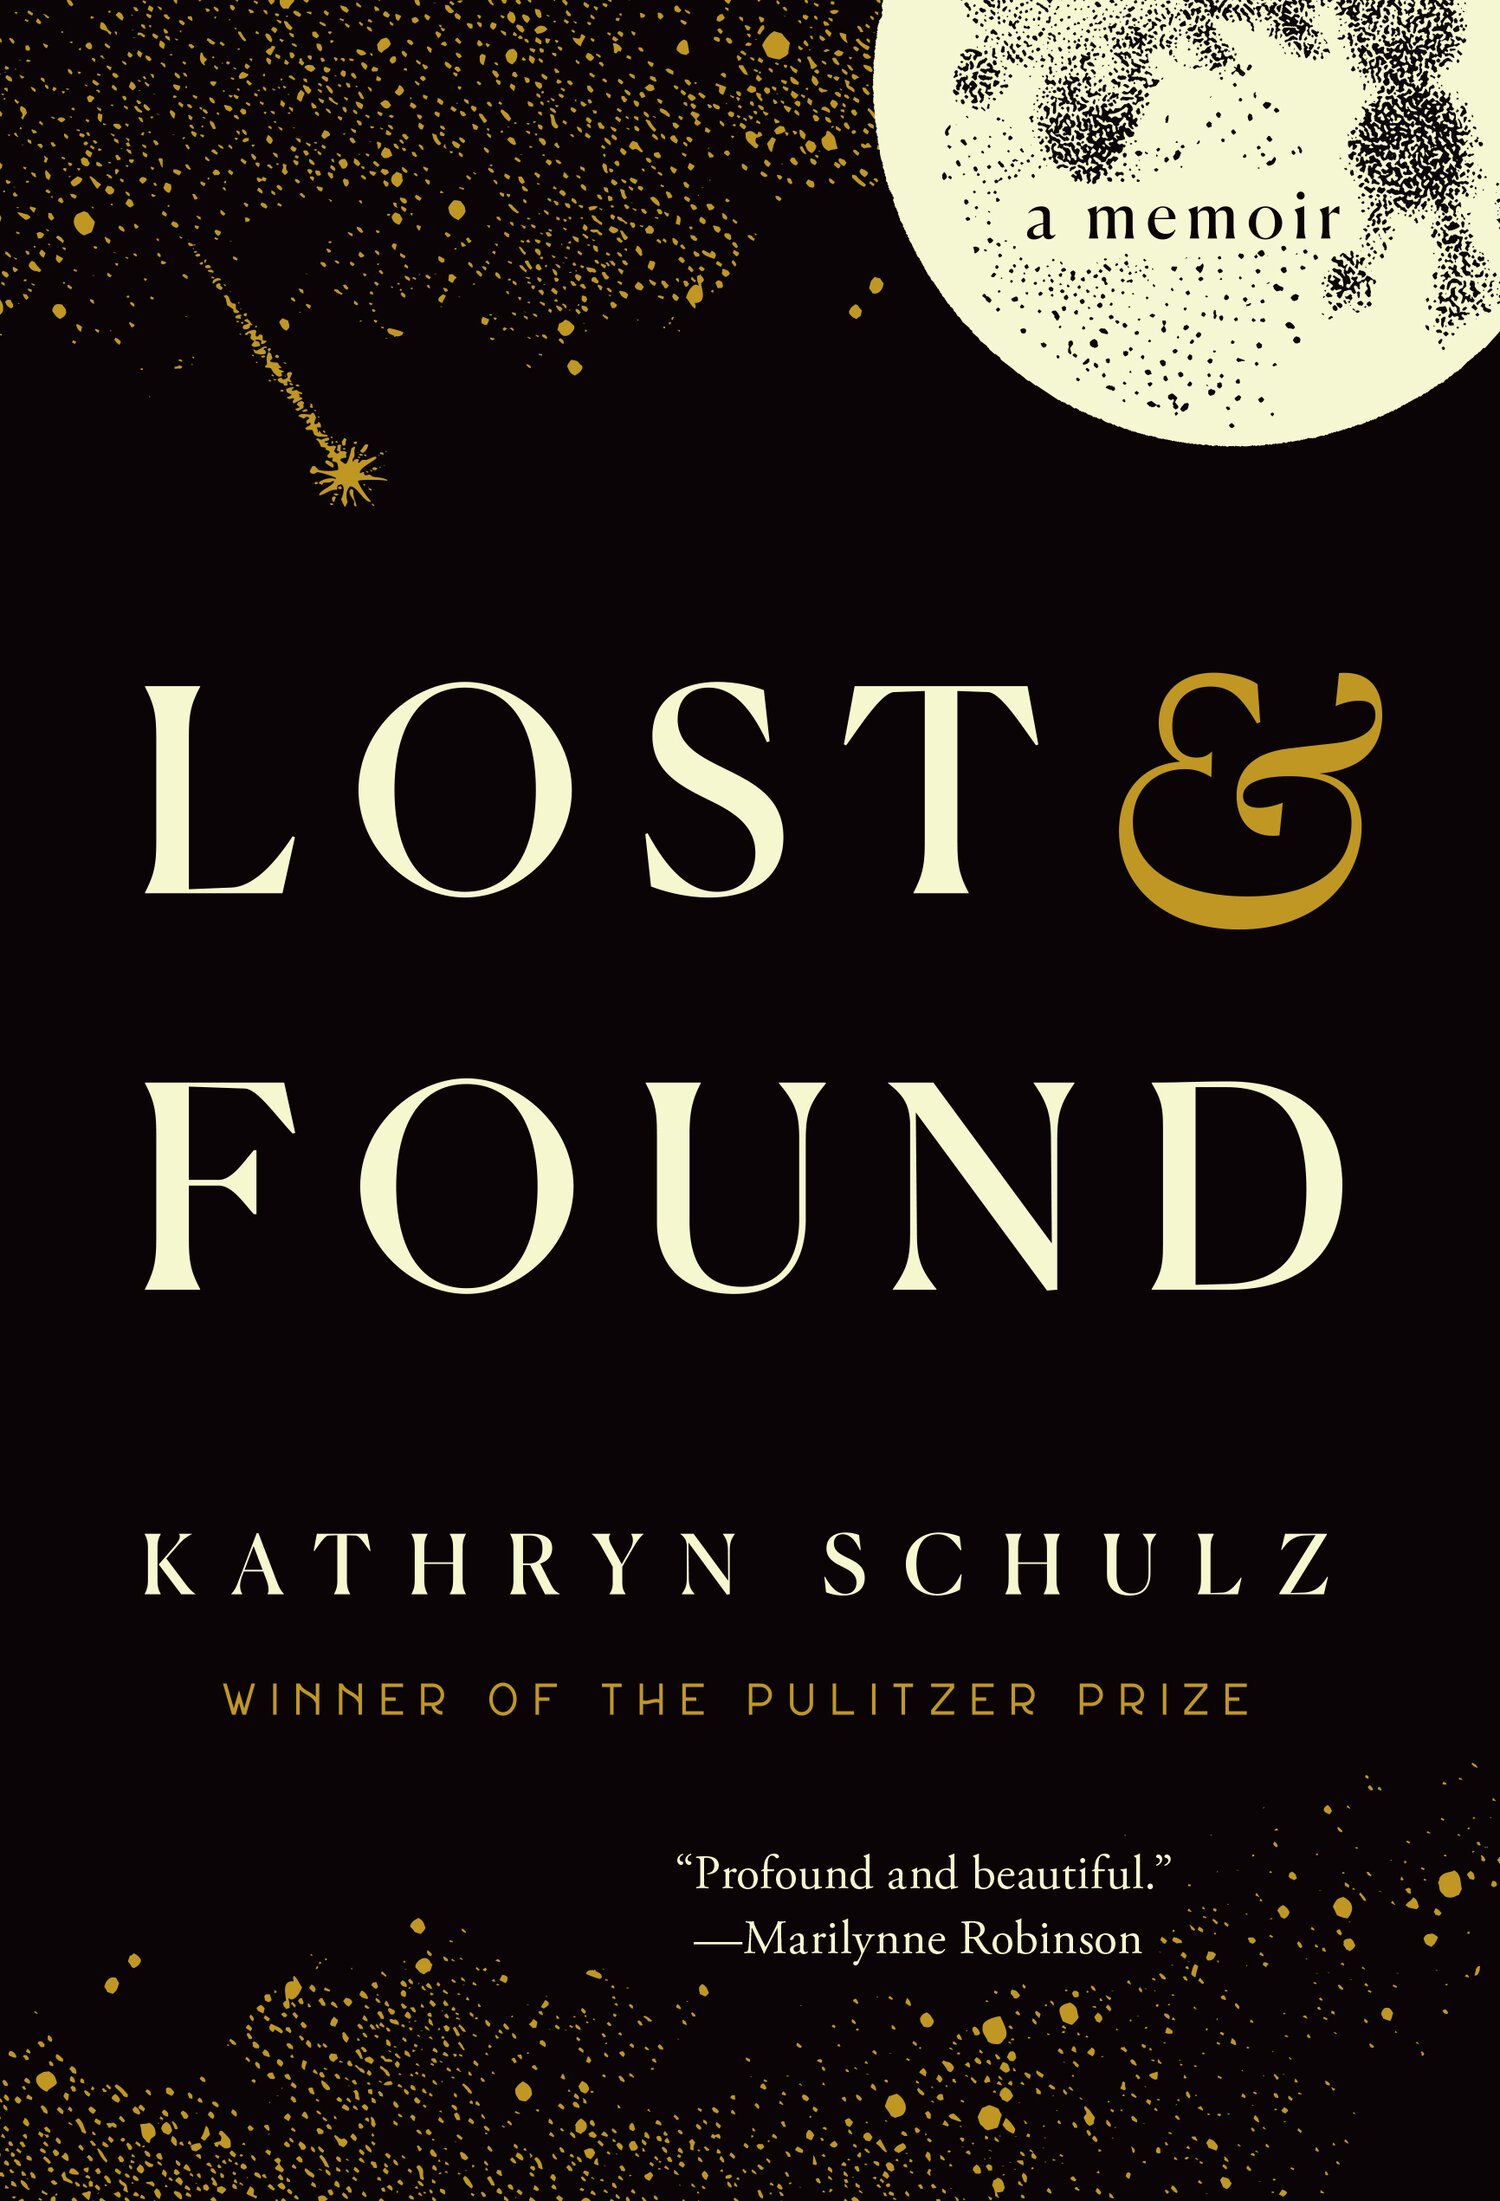 Lost and Found by Kathryn Schulz